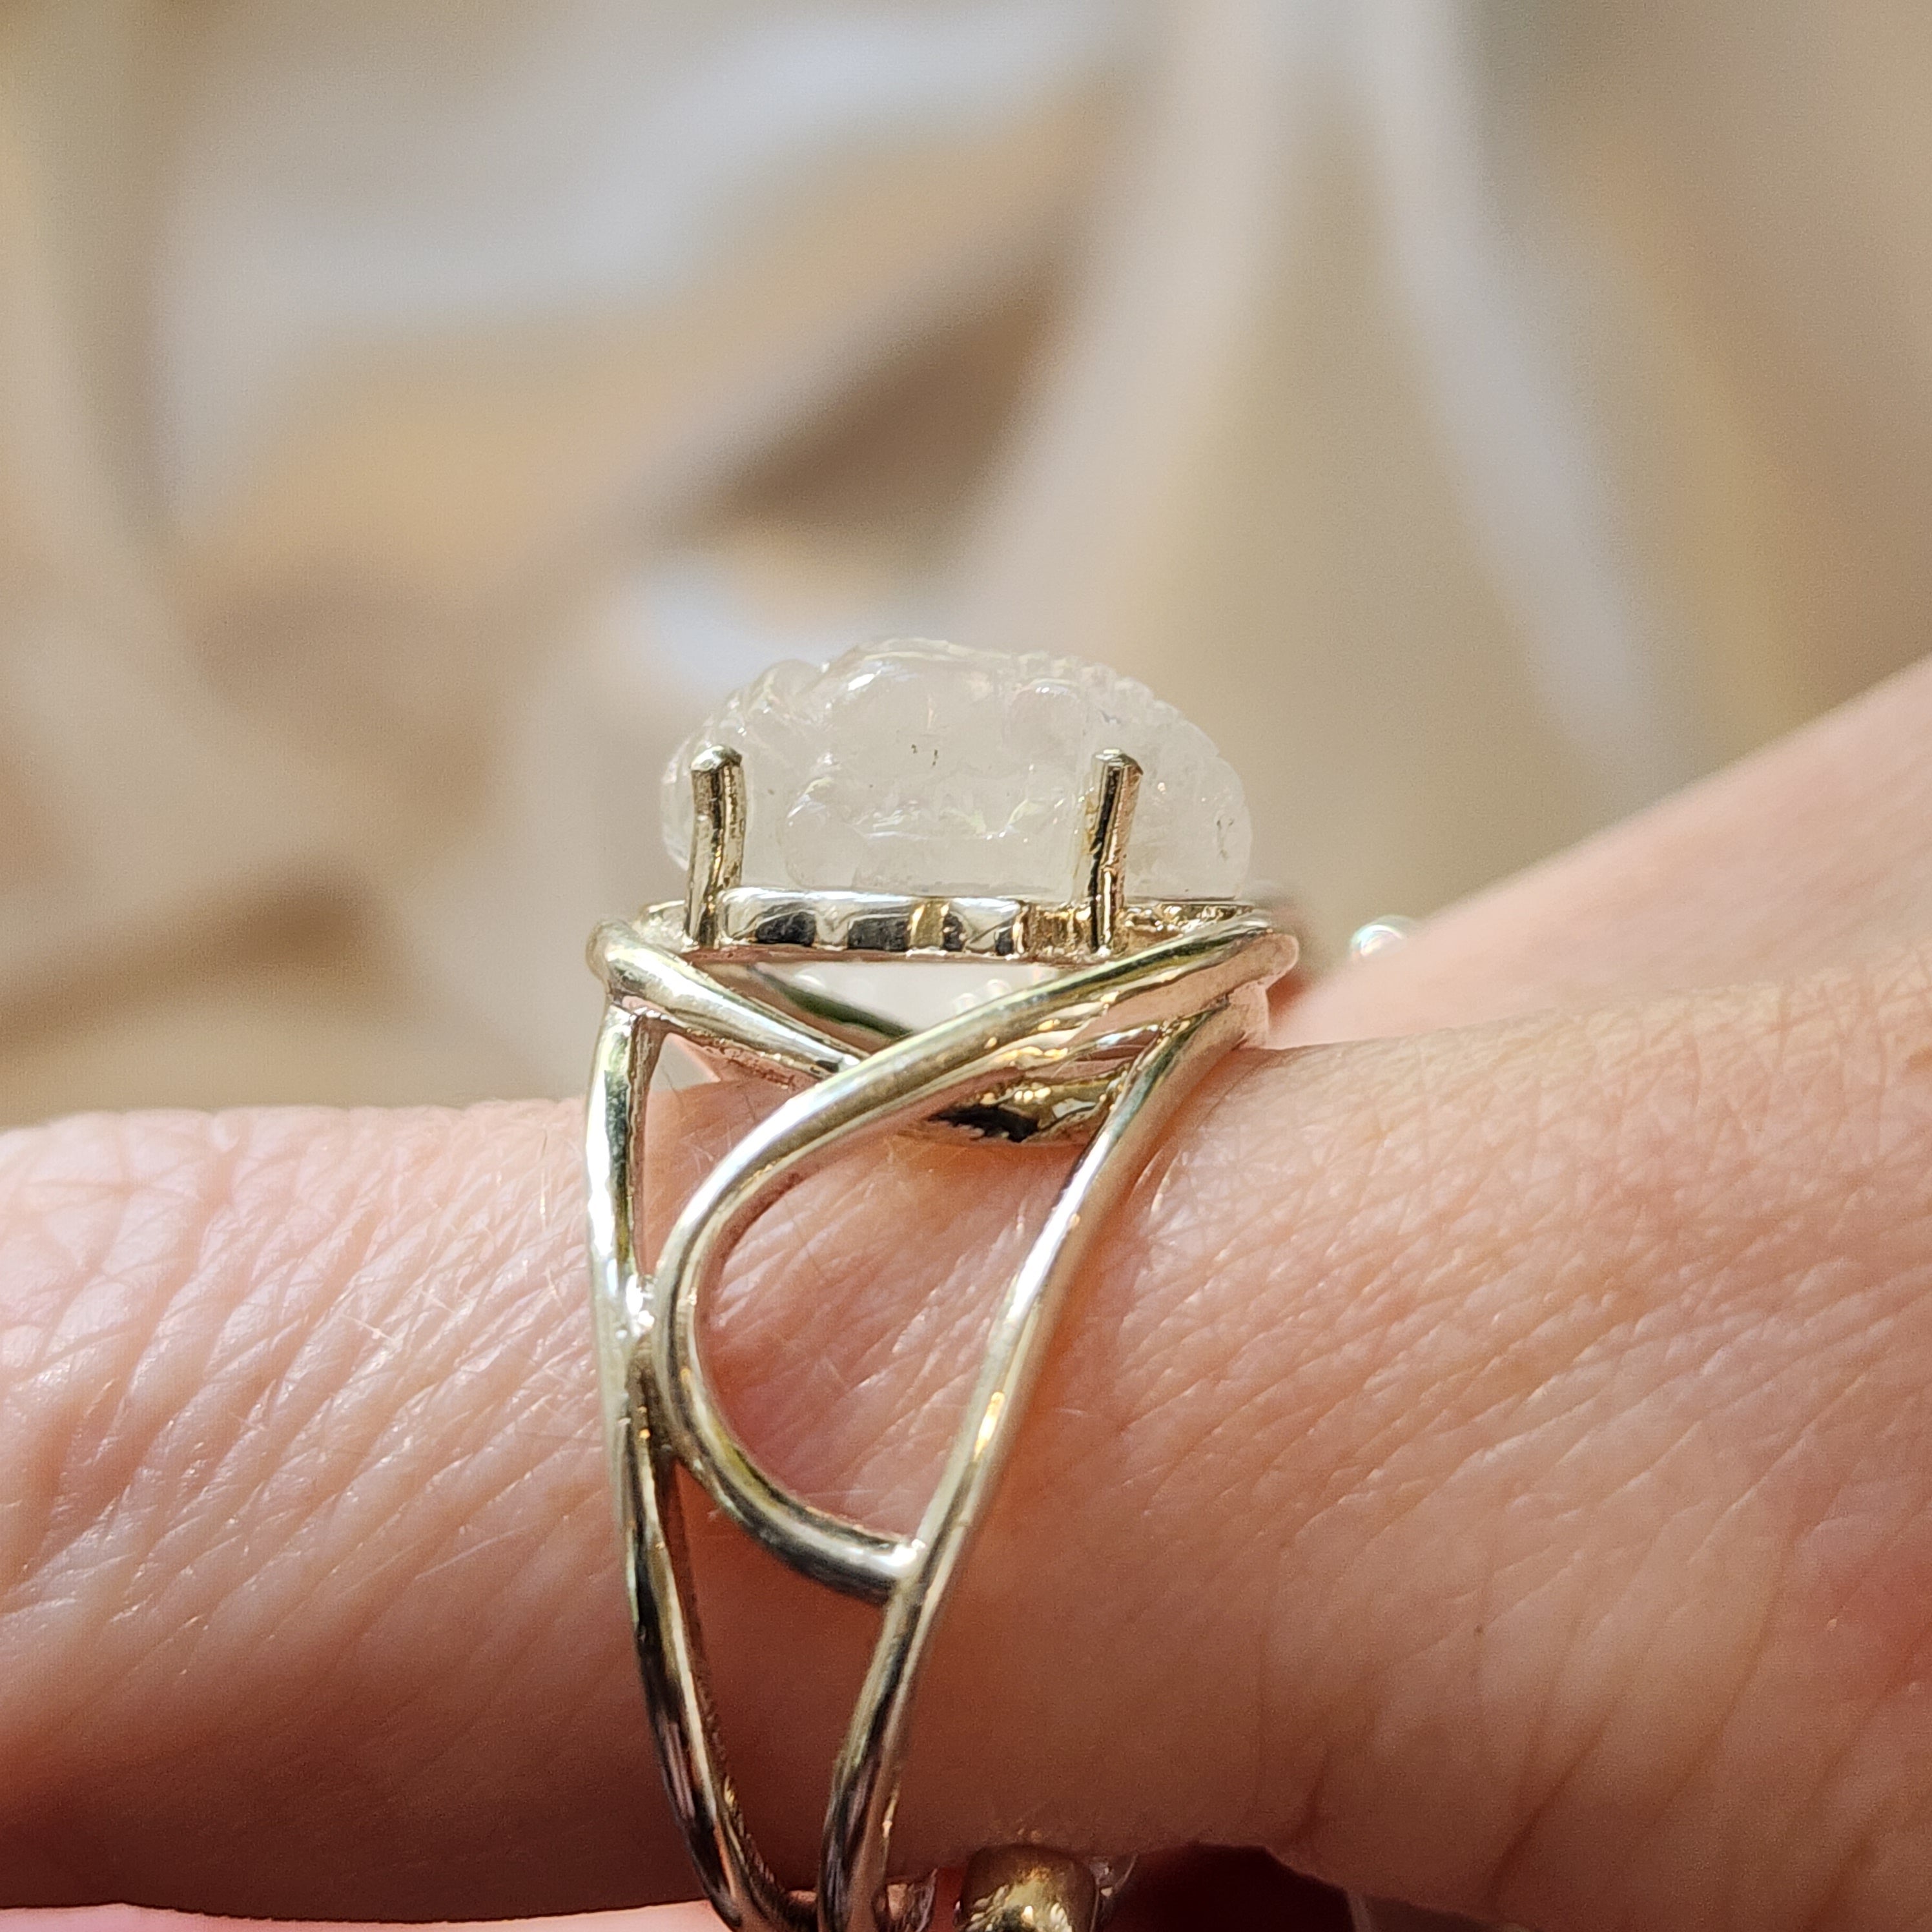 Rainbow Moonstone Ganesha Finger Cuff Adjustable Ring .925 Sterling Silver for New Beginnings & Clearing Blockages